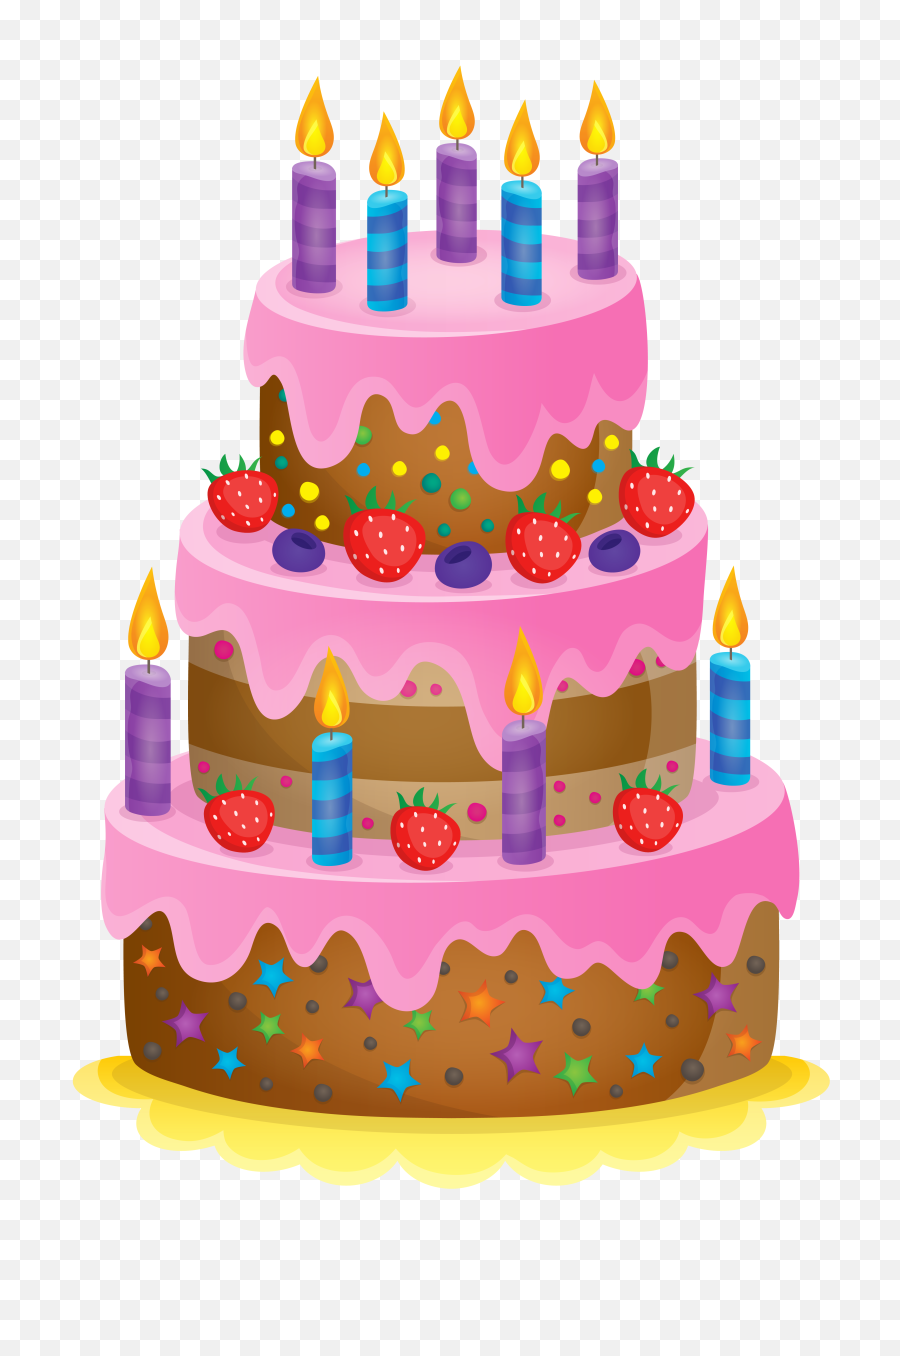 Cute Cake Png Clipart Image Birthday Transparent Background